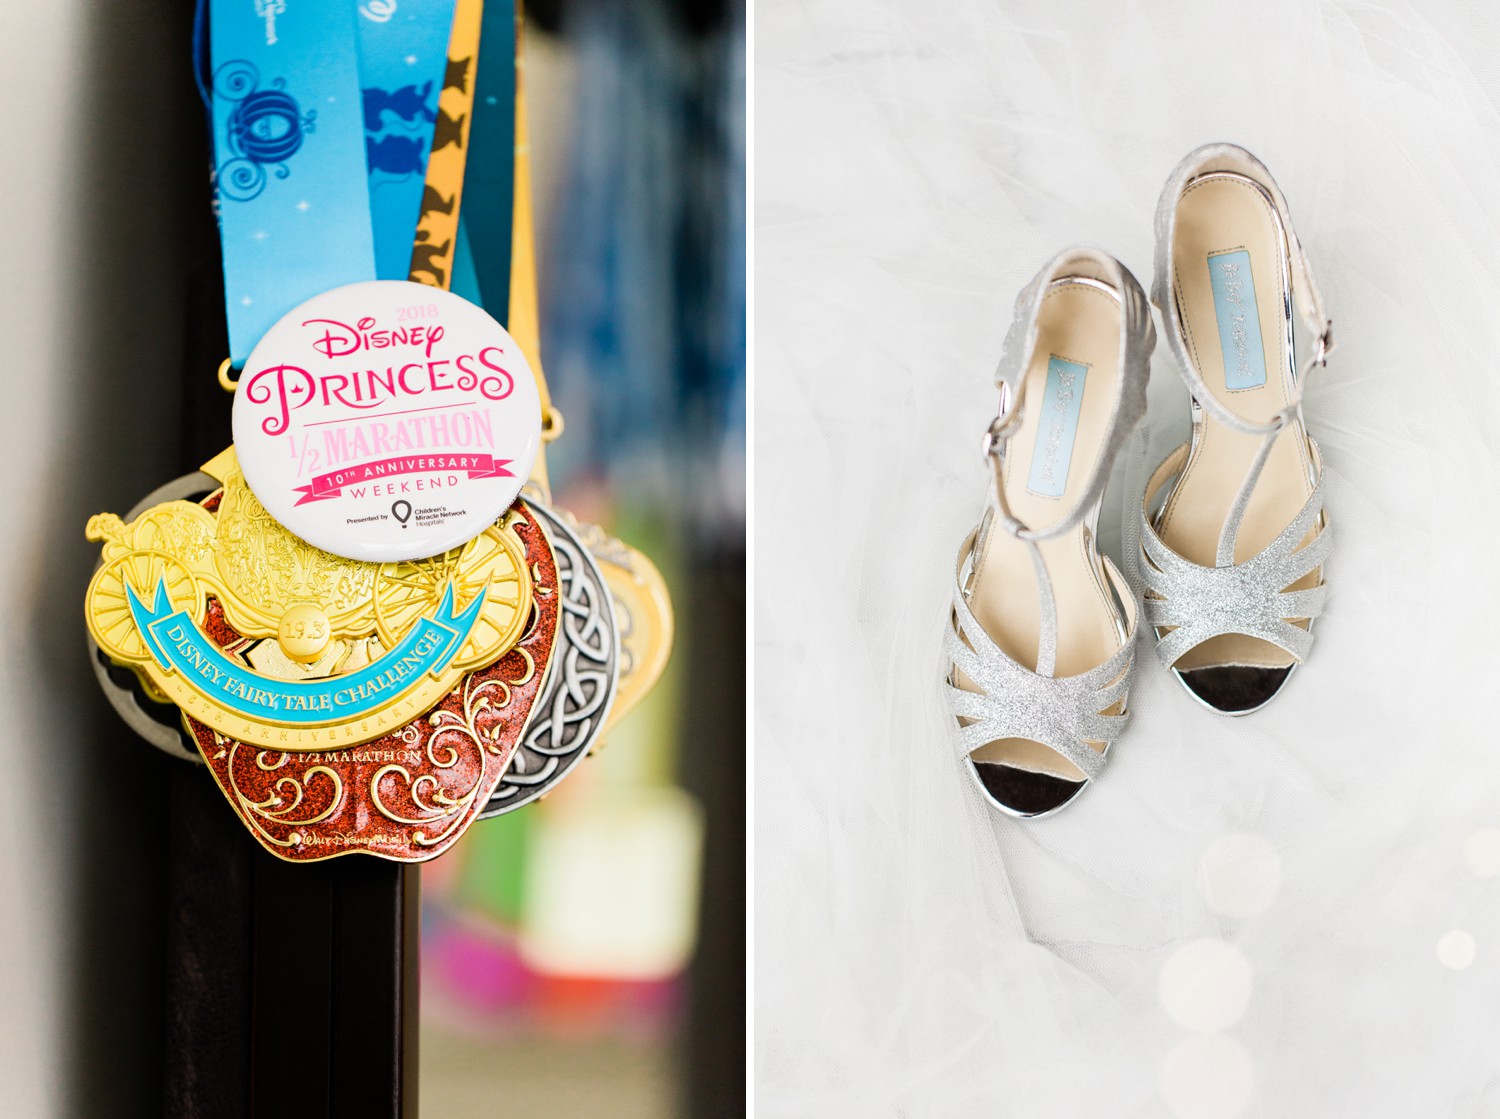 From running shoes to high heels. #DisneyBride